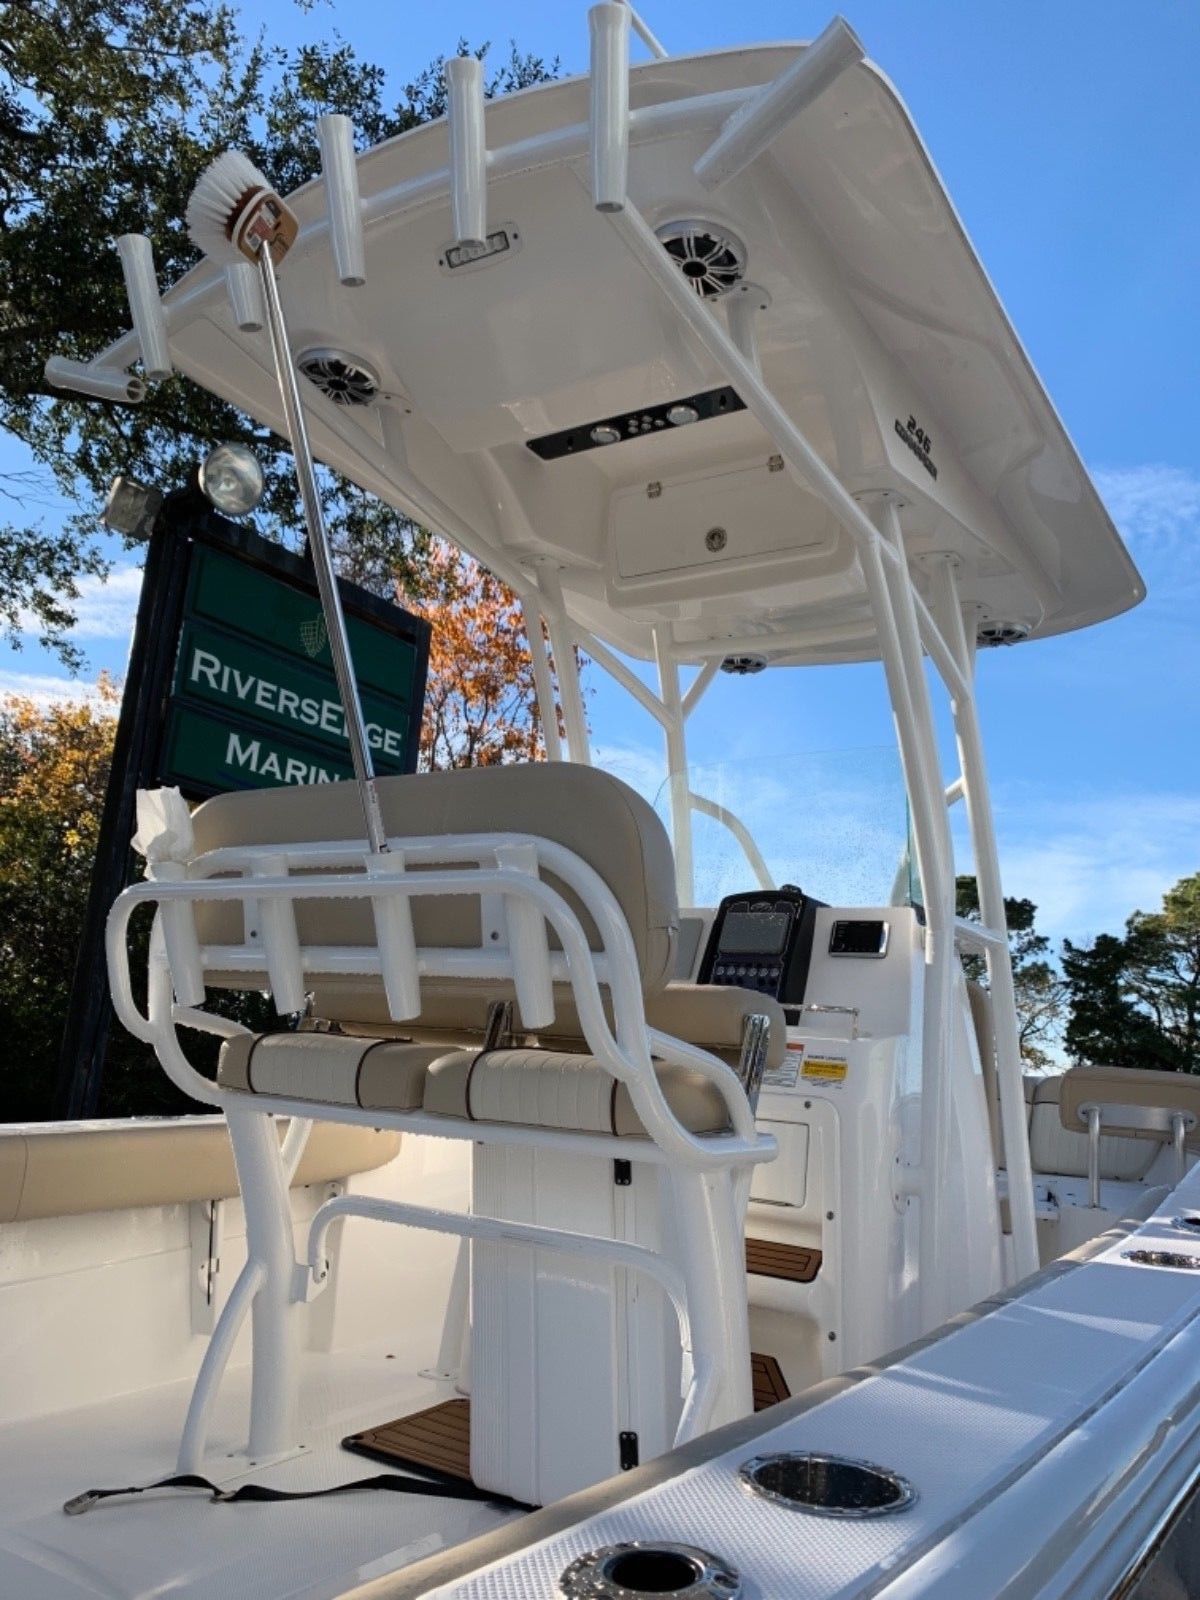 Seafox 246 2018 for sale for $72,000 - Boats-from-USA.com